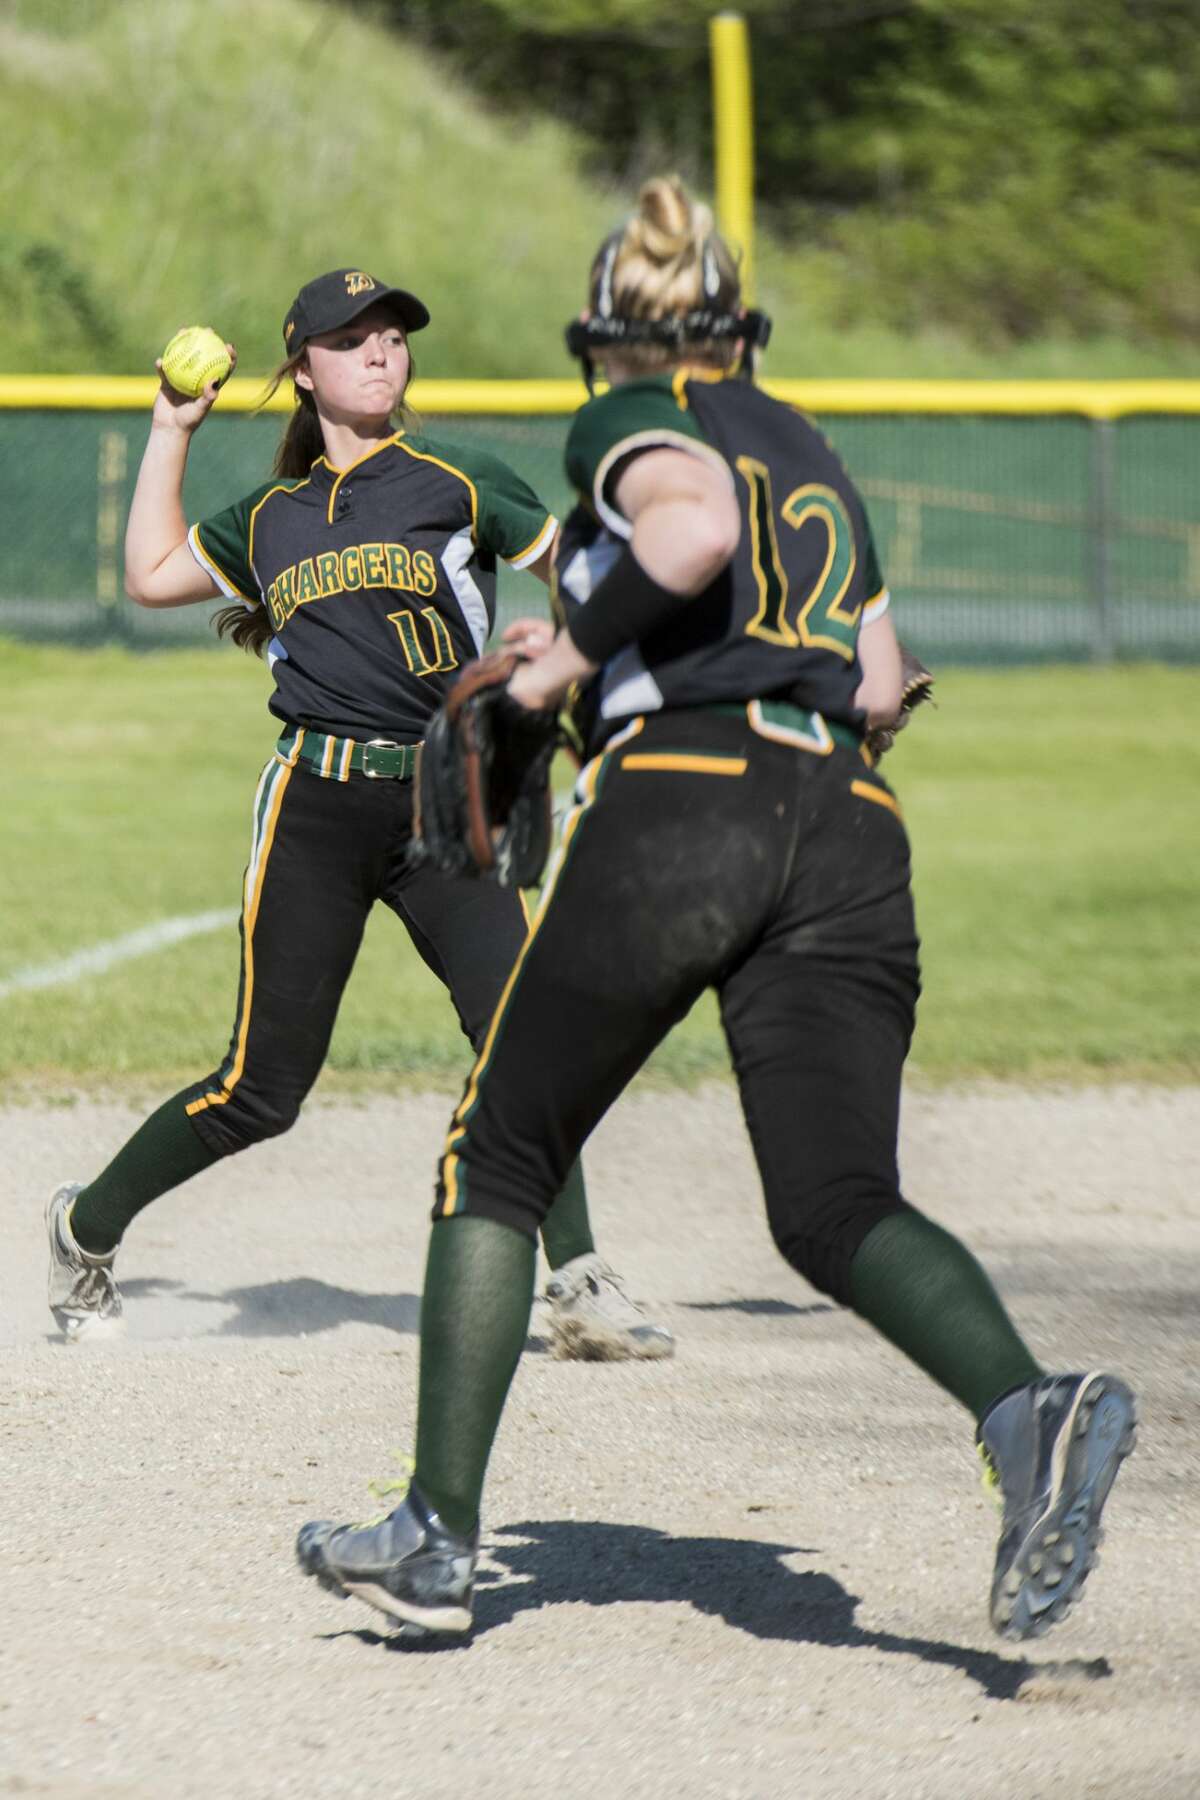 Dow senior Kylee Alexander fields the ball as pitcher, sophomore Riley Davis, watches during a double-header at H.H Dow High School in Midland on Monday.